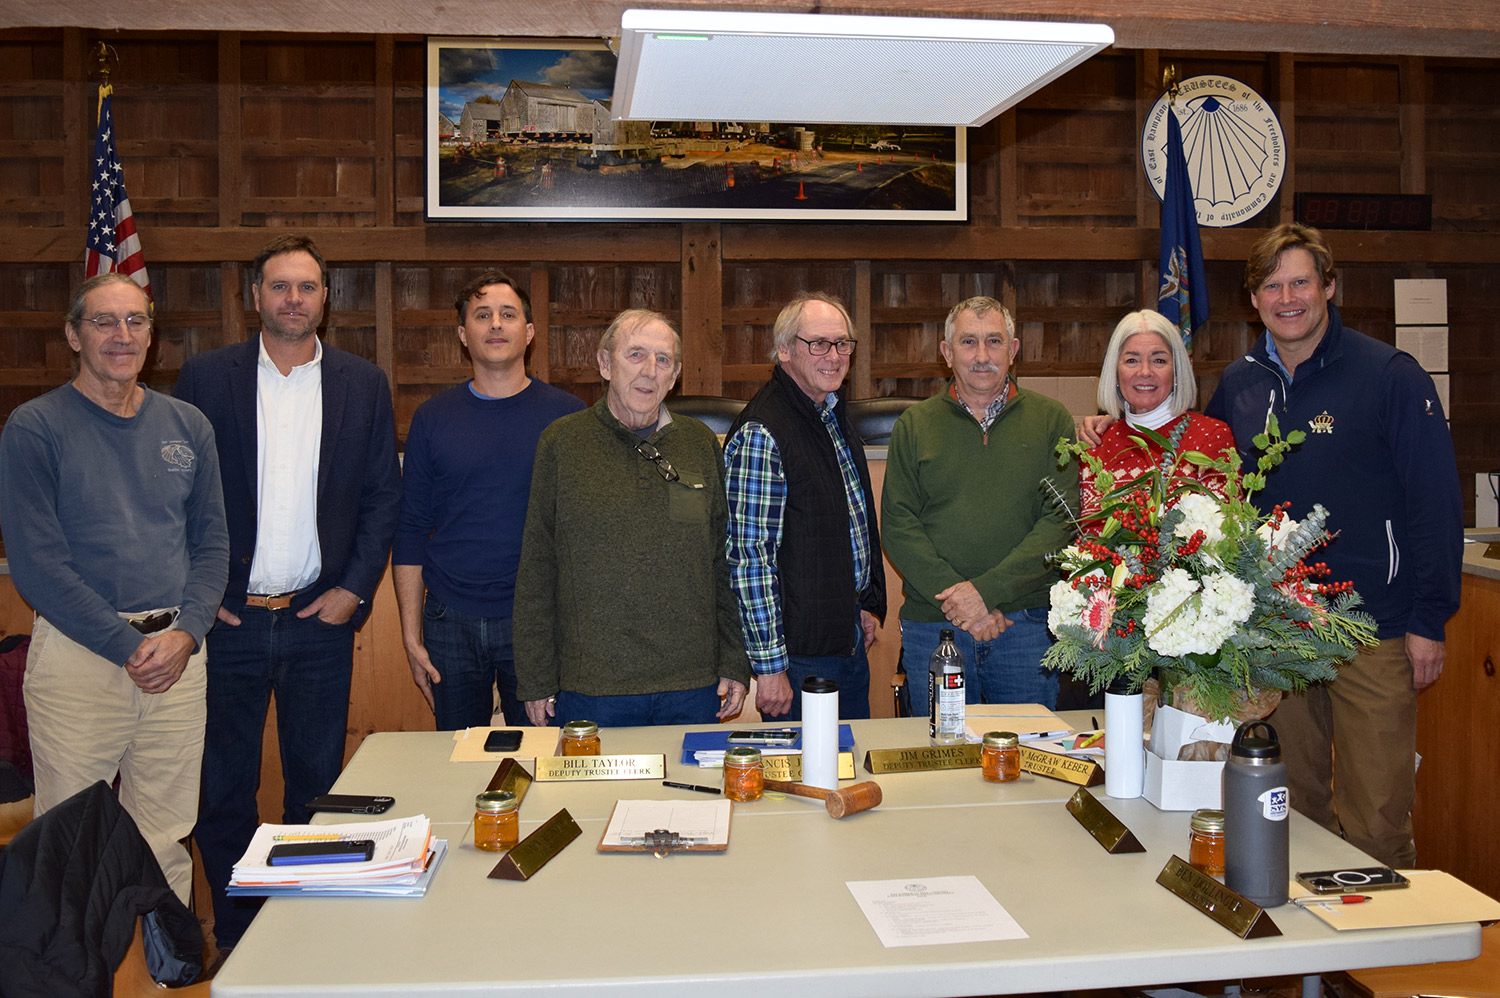 The East Hampton Town Trustees finalized new dock policies this week and bid farewell to their colleague Susan McGraw Keber, who served three terms. Christopher Walsh